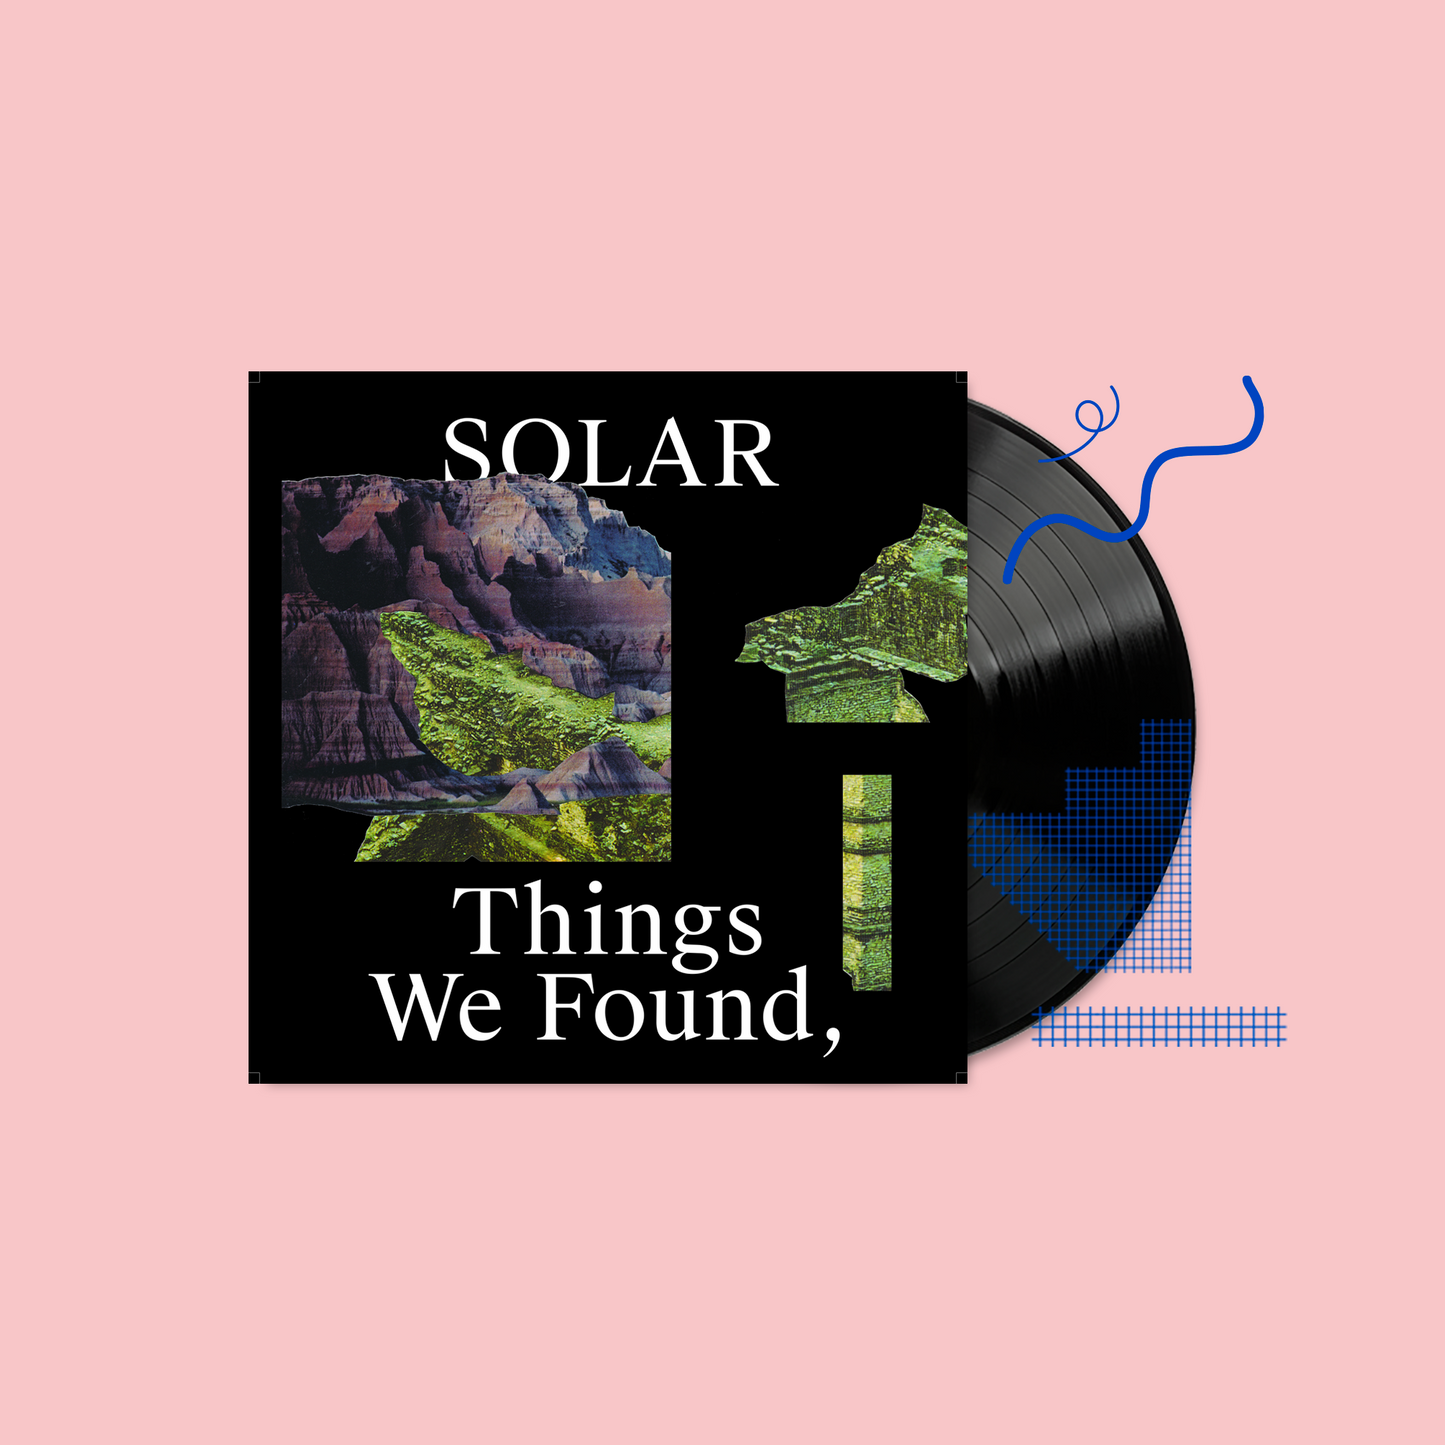 SOLAR – Things We Found, but Left Behind